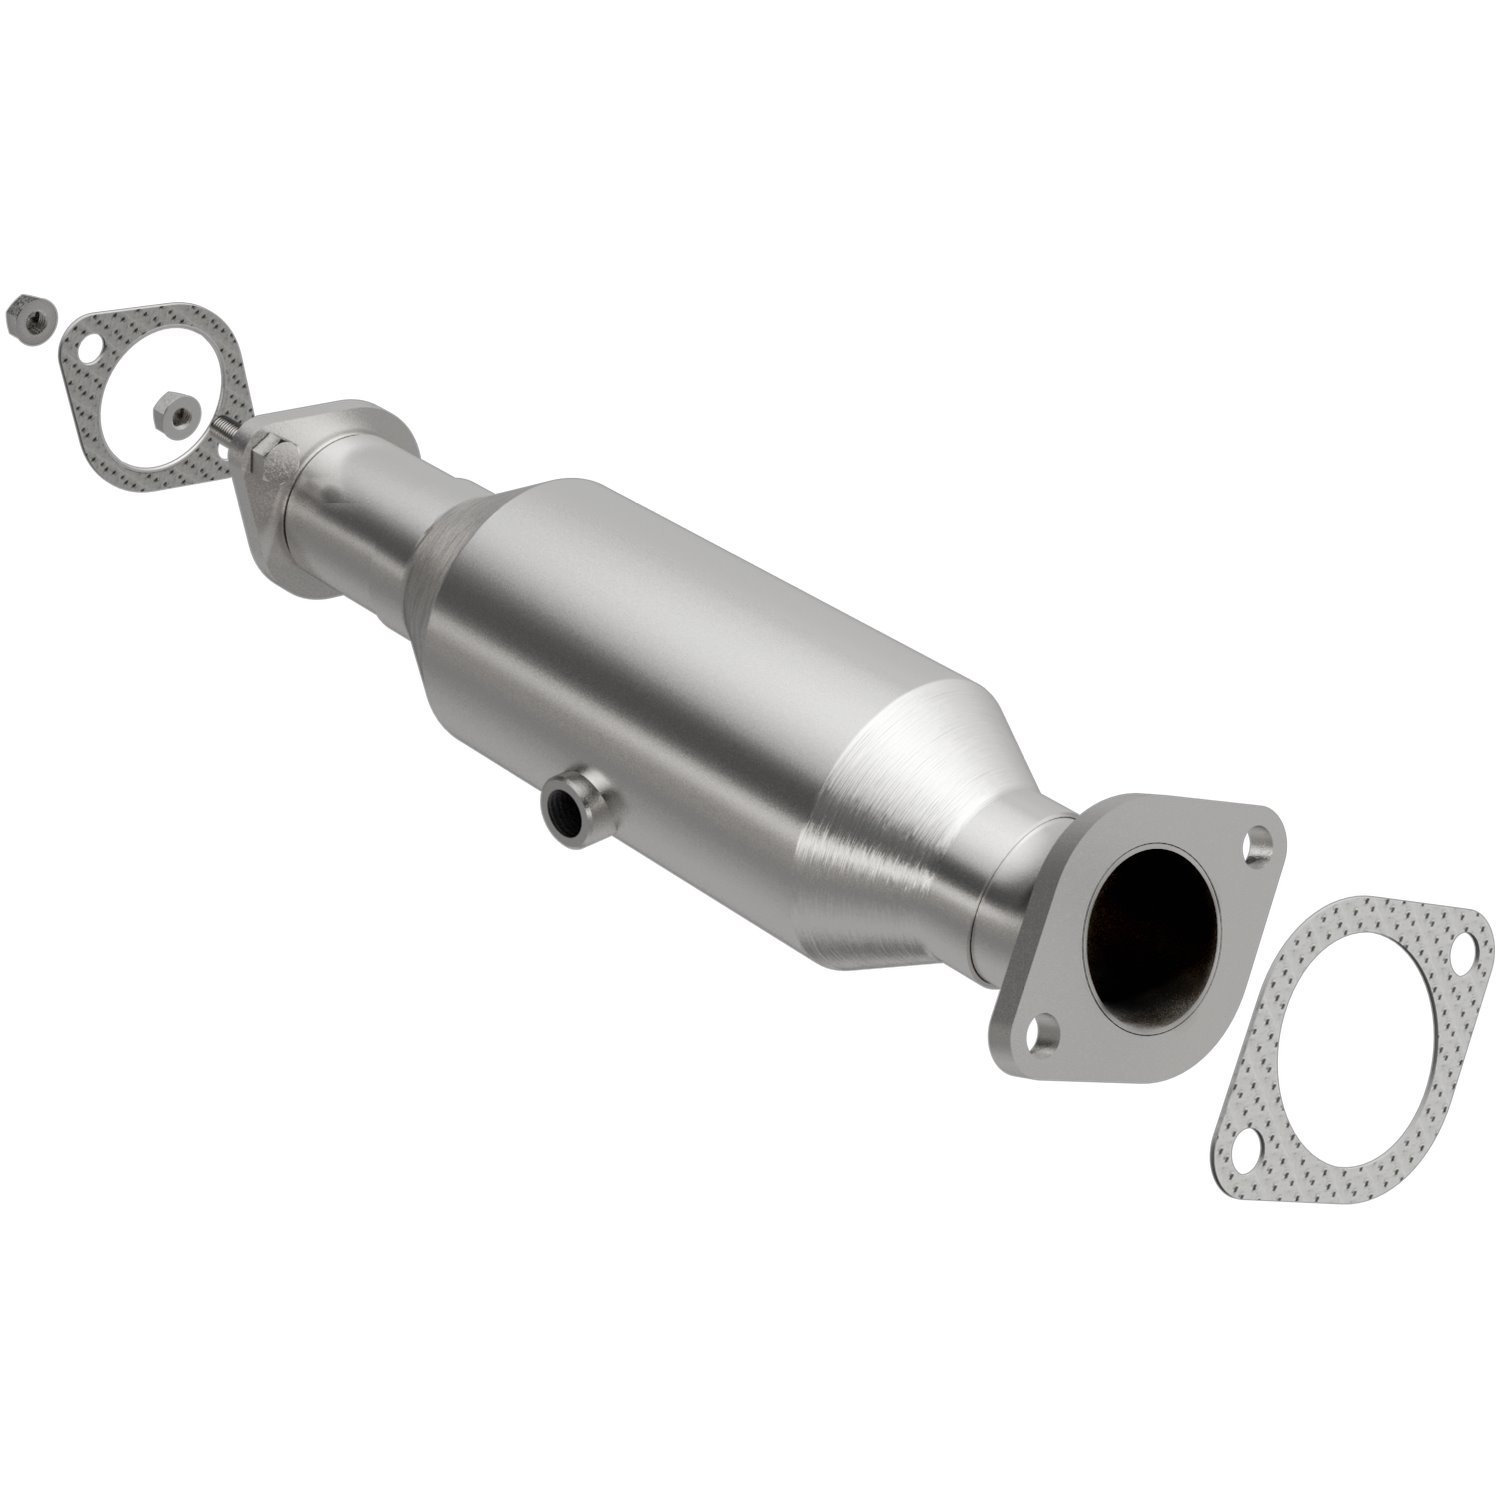 OEM Grade Federal / EPA Compliant Direct-Fit Catalytic Converter 21-161